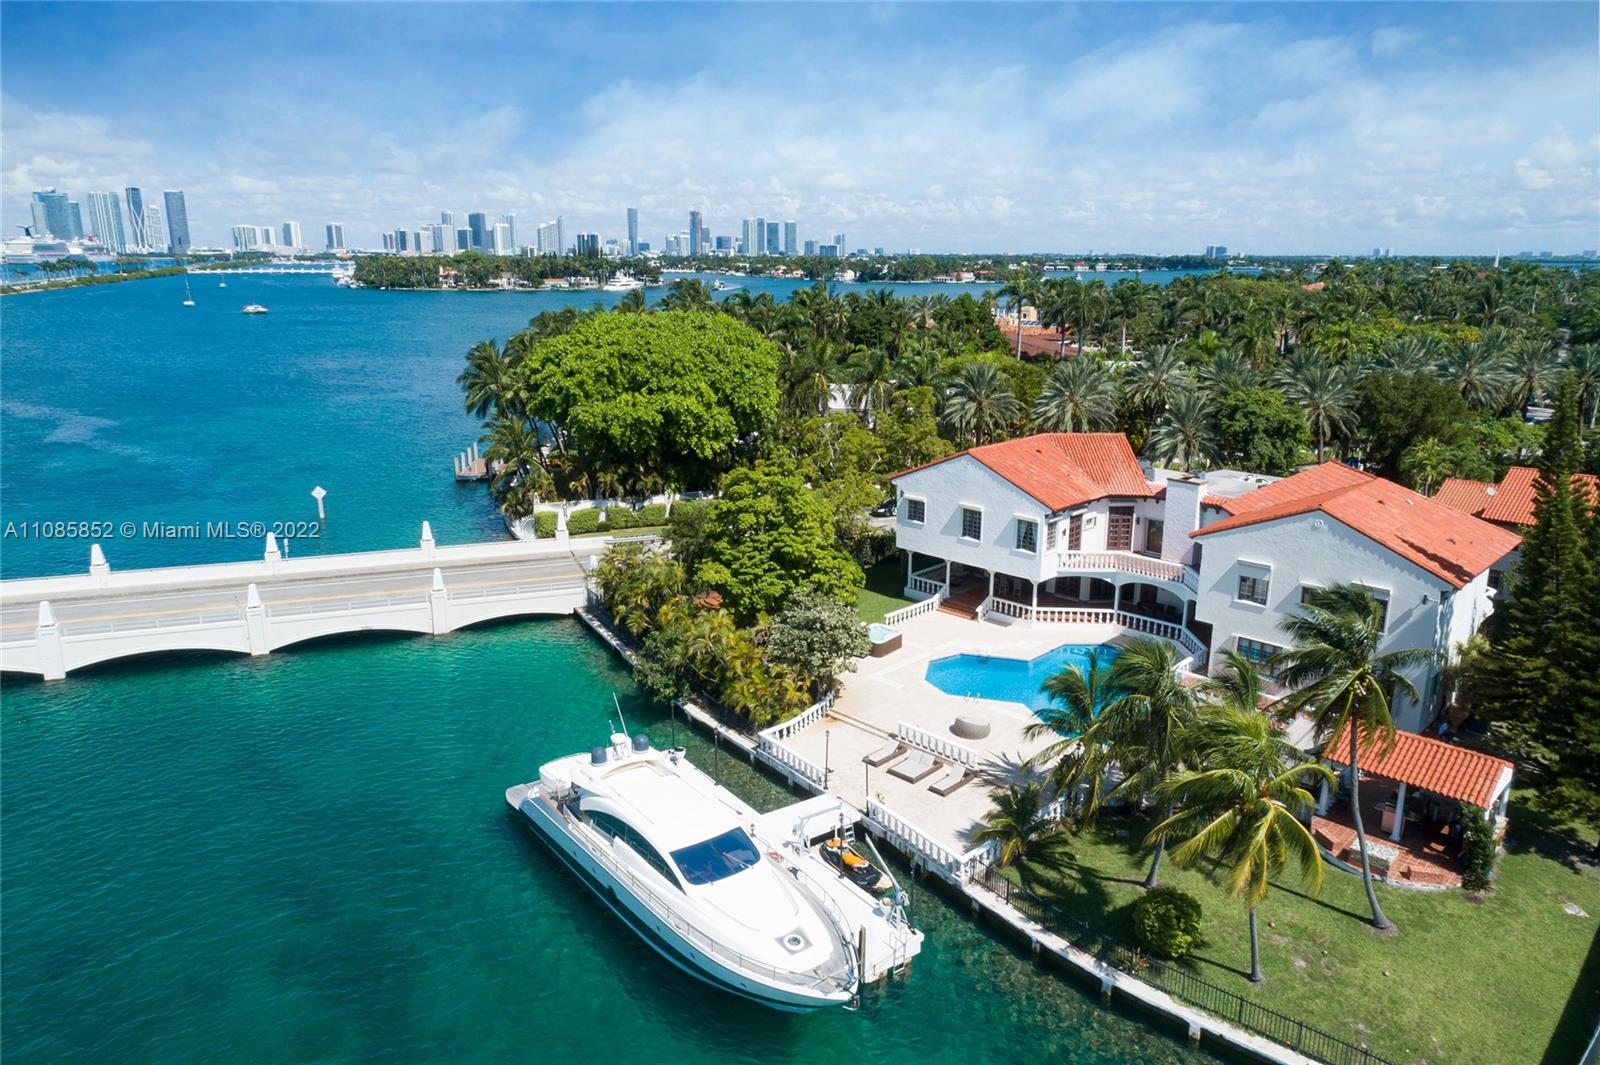 Now is the time to secure one of the last available opportunities to build your dream home on Miami’s ultra-exclusive island to the stars. Star Island is a guard gated private island with only 34 homes located in Miami Beach and within minutes to the Financial District and the very best of South Florida. Build on over an acre with 190’ of water frontage and a deep-water dock with high 65’ bridge clearance for large yachts. With nearly $400 million sold on Star Island since 2020 including 6 sales between $30M and $75M, this is your call to action.